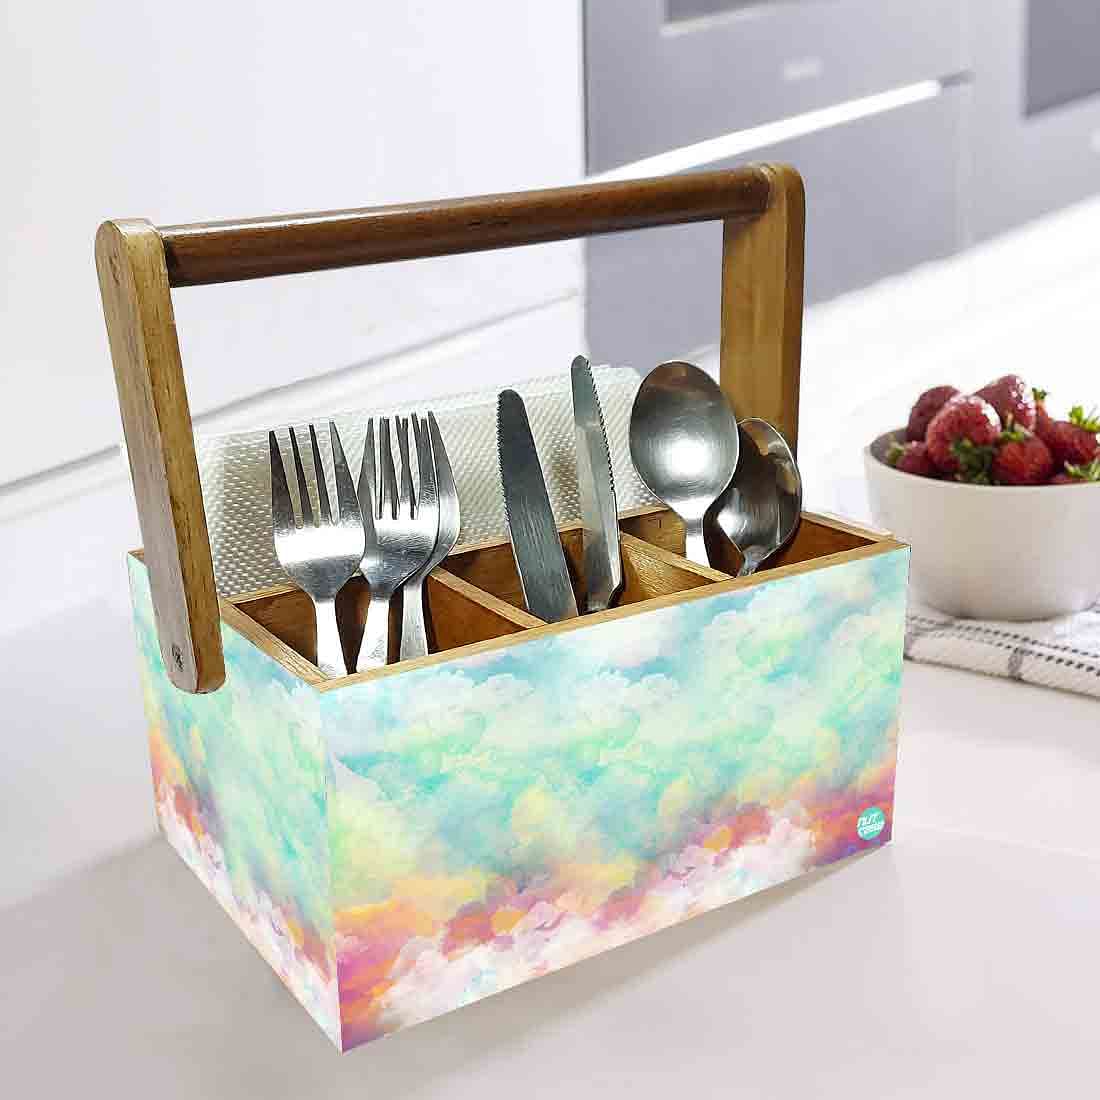 Cutlery Tissue Holder for Dining Table Spoons Knives Organizer - Watercolor Nutcase